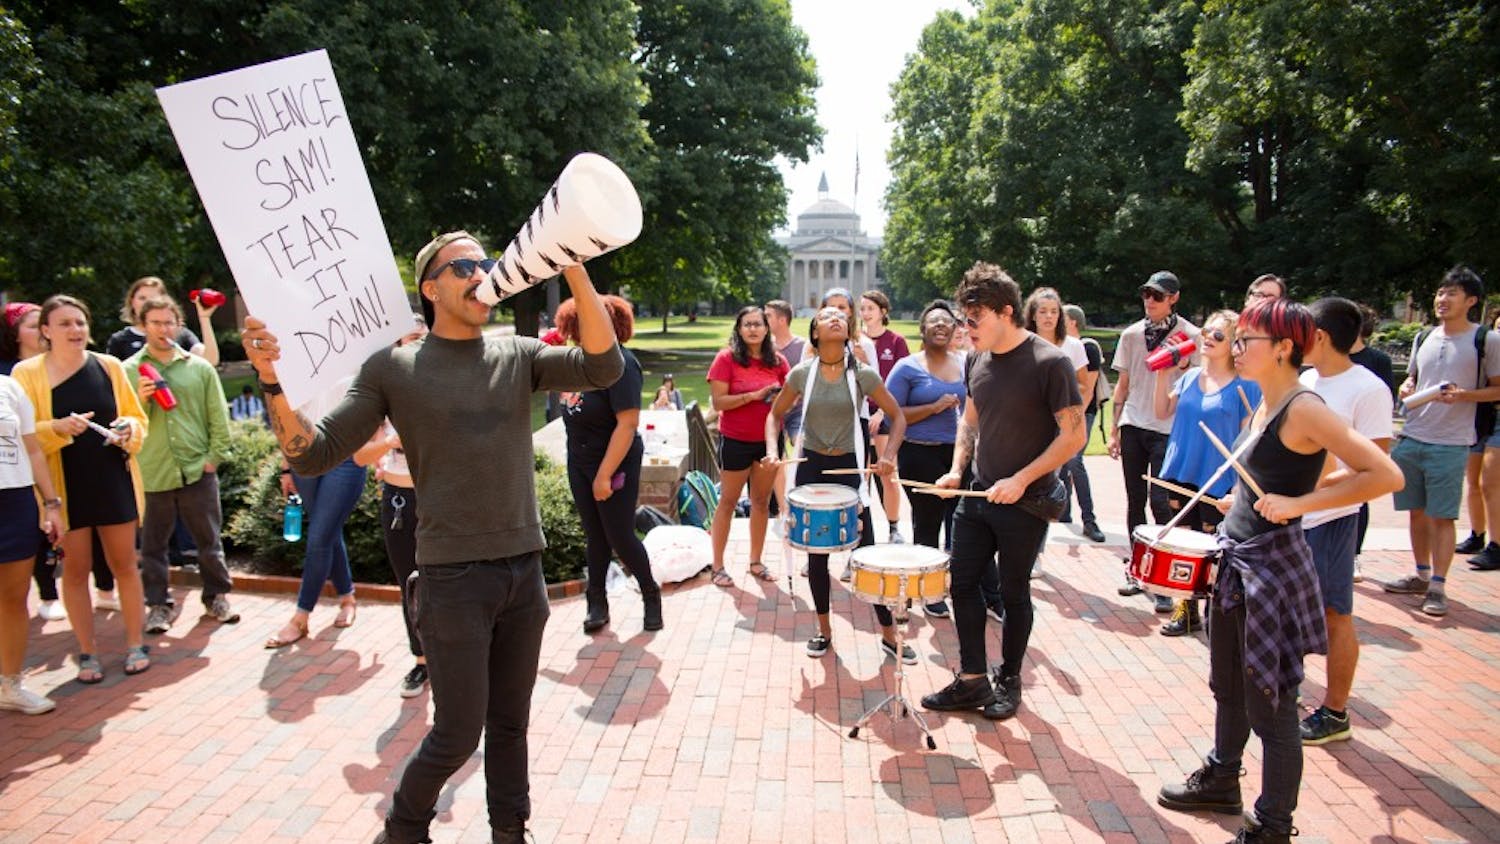 A noise demonstration was held outside South Building on Wednesday afternoon. Demonstrators used drums, pots, pans and noise makers to protest the Silent Sam statue on campus.&nbsp;